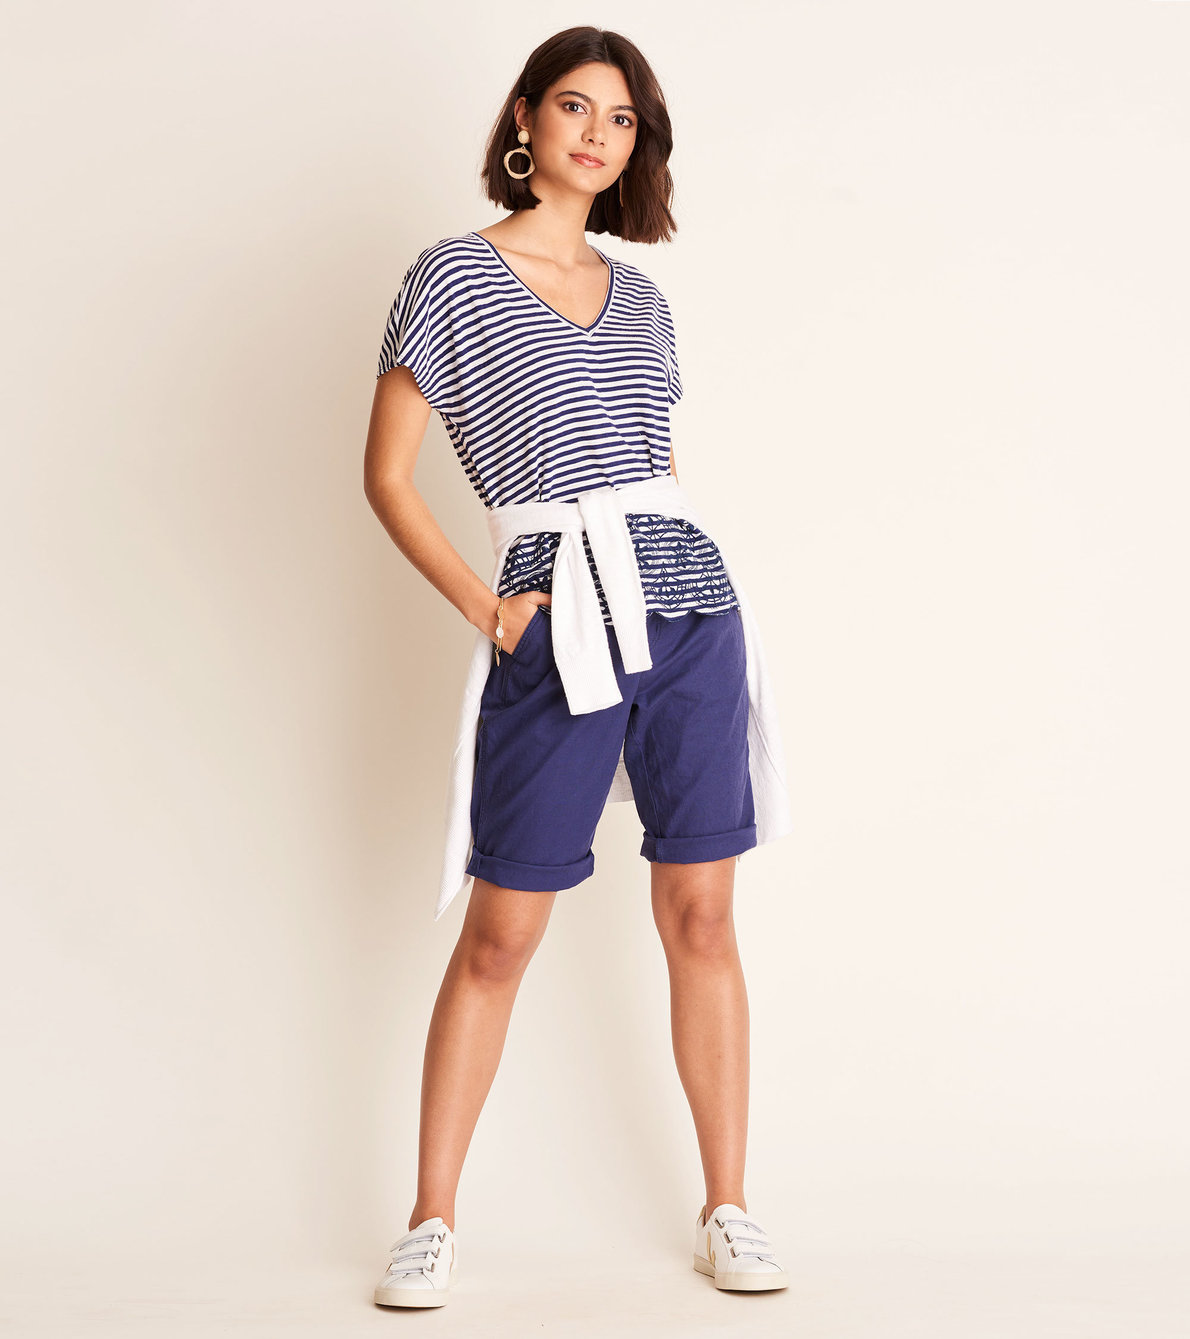 View larger image of Embroidered Tee - Blue Stripes